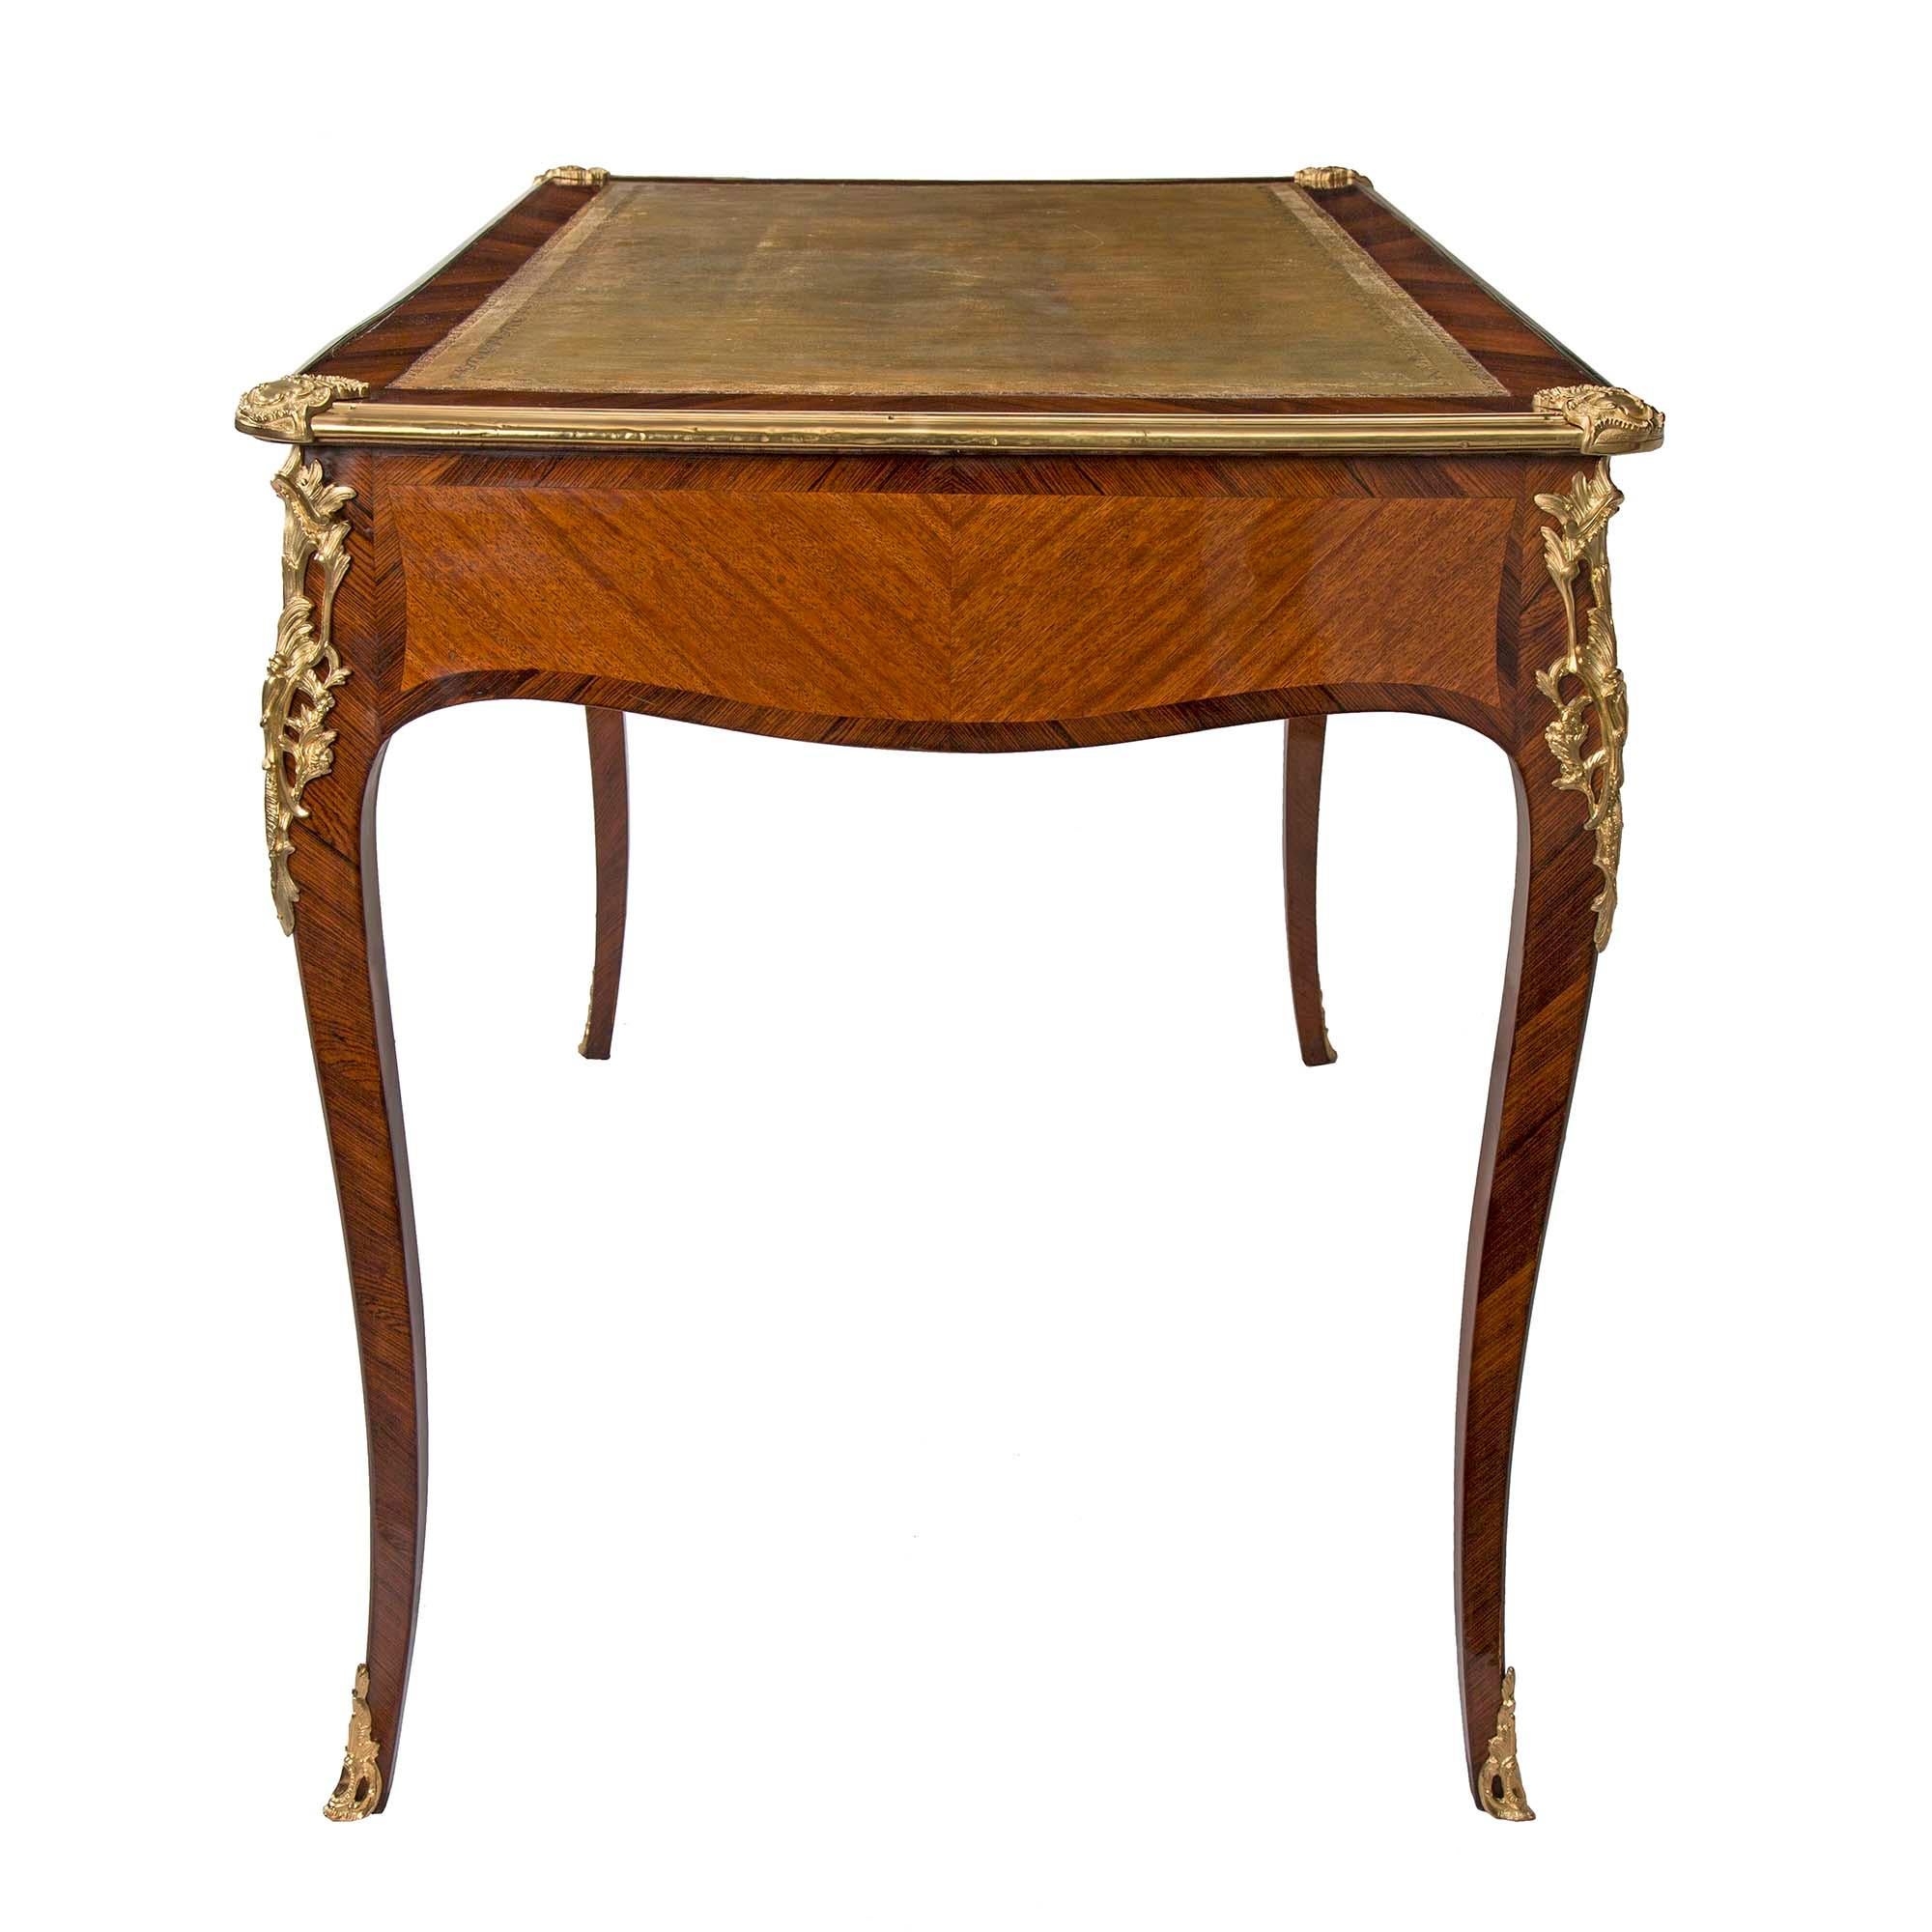 French Mid-19th Century Louis XV Style Tulipwood and Kingwood Bureau Plat For Sale 1